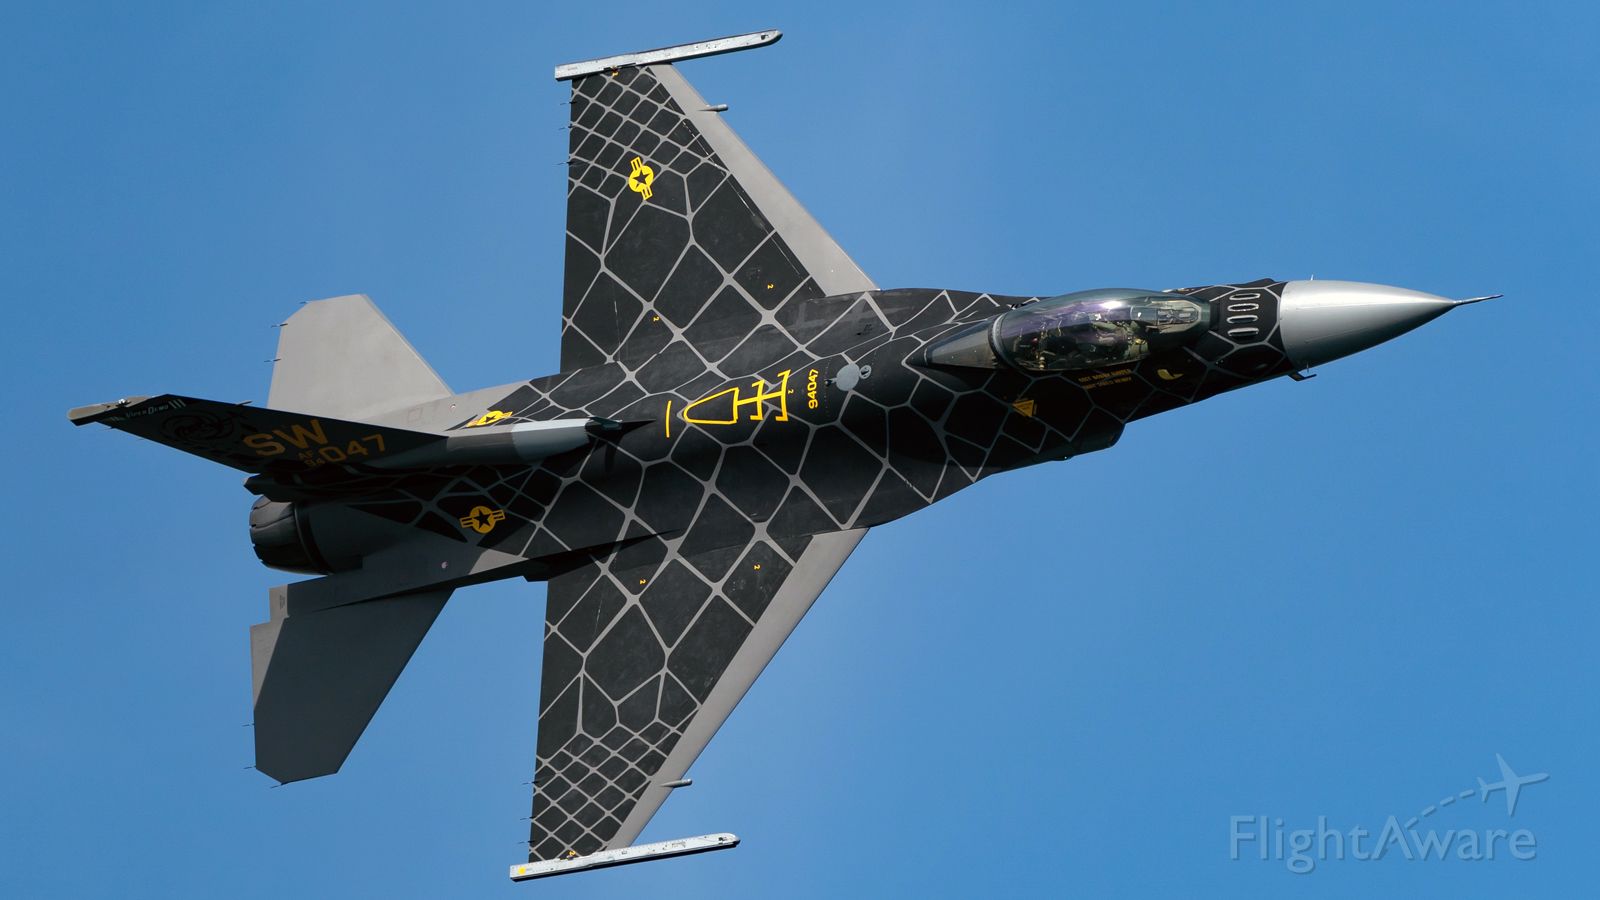 Lockheed F-16 Fighting Falcon (94-0047) - The F-16 demo team showing off their new demo livery at the 2020 HAPO “Over the River” Airshow.